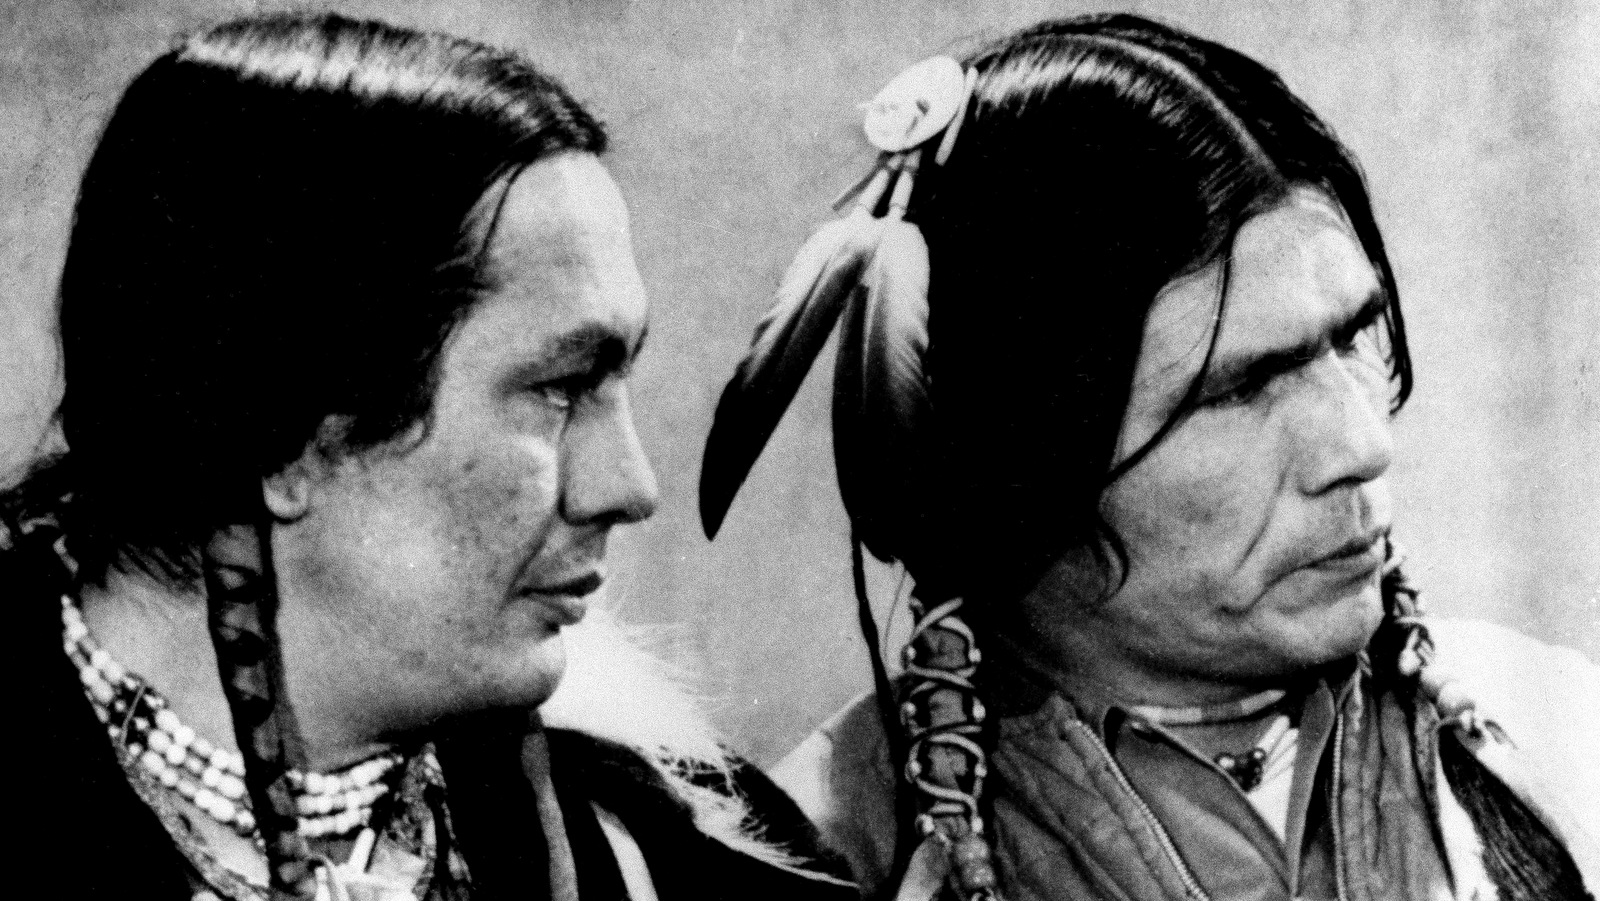 Russell Means, left, and Dennis Banks, American Indian Movement (AIM) leaders are shown on trial in St. Paul, Minn., April 12, 1974. They are on trial for the occupation of Wounded Knee, S.D. in 1973. Means and Banks say the government is on trial, not them and predict they will be victorious. (AP Photo)